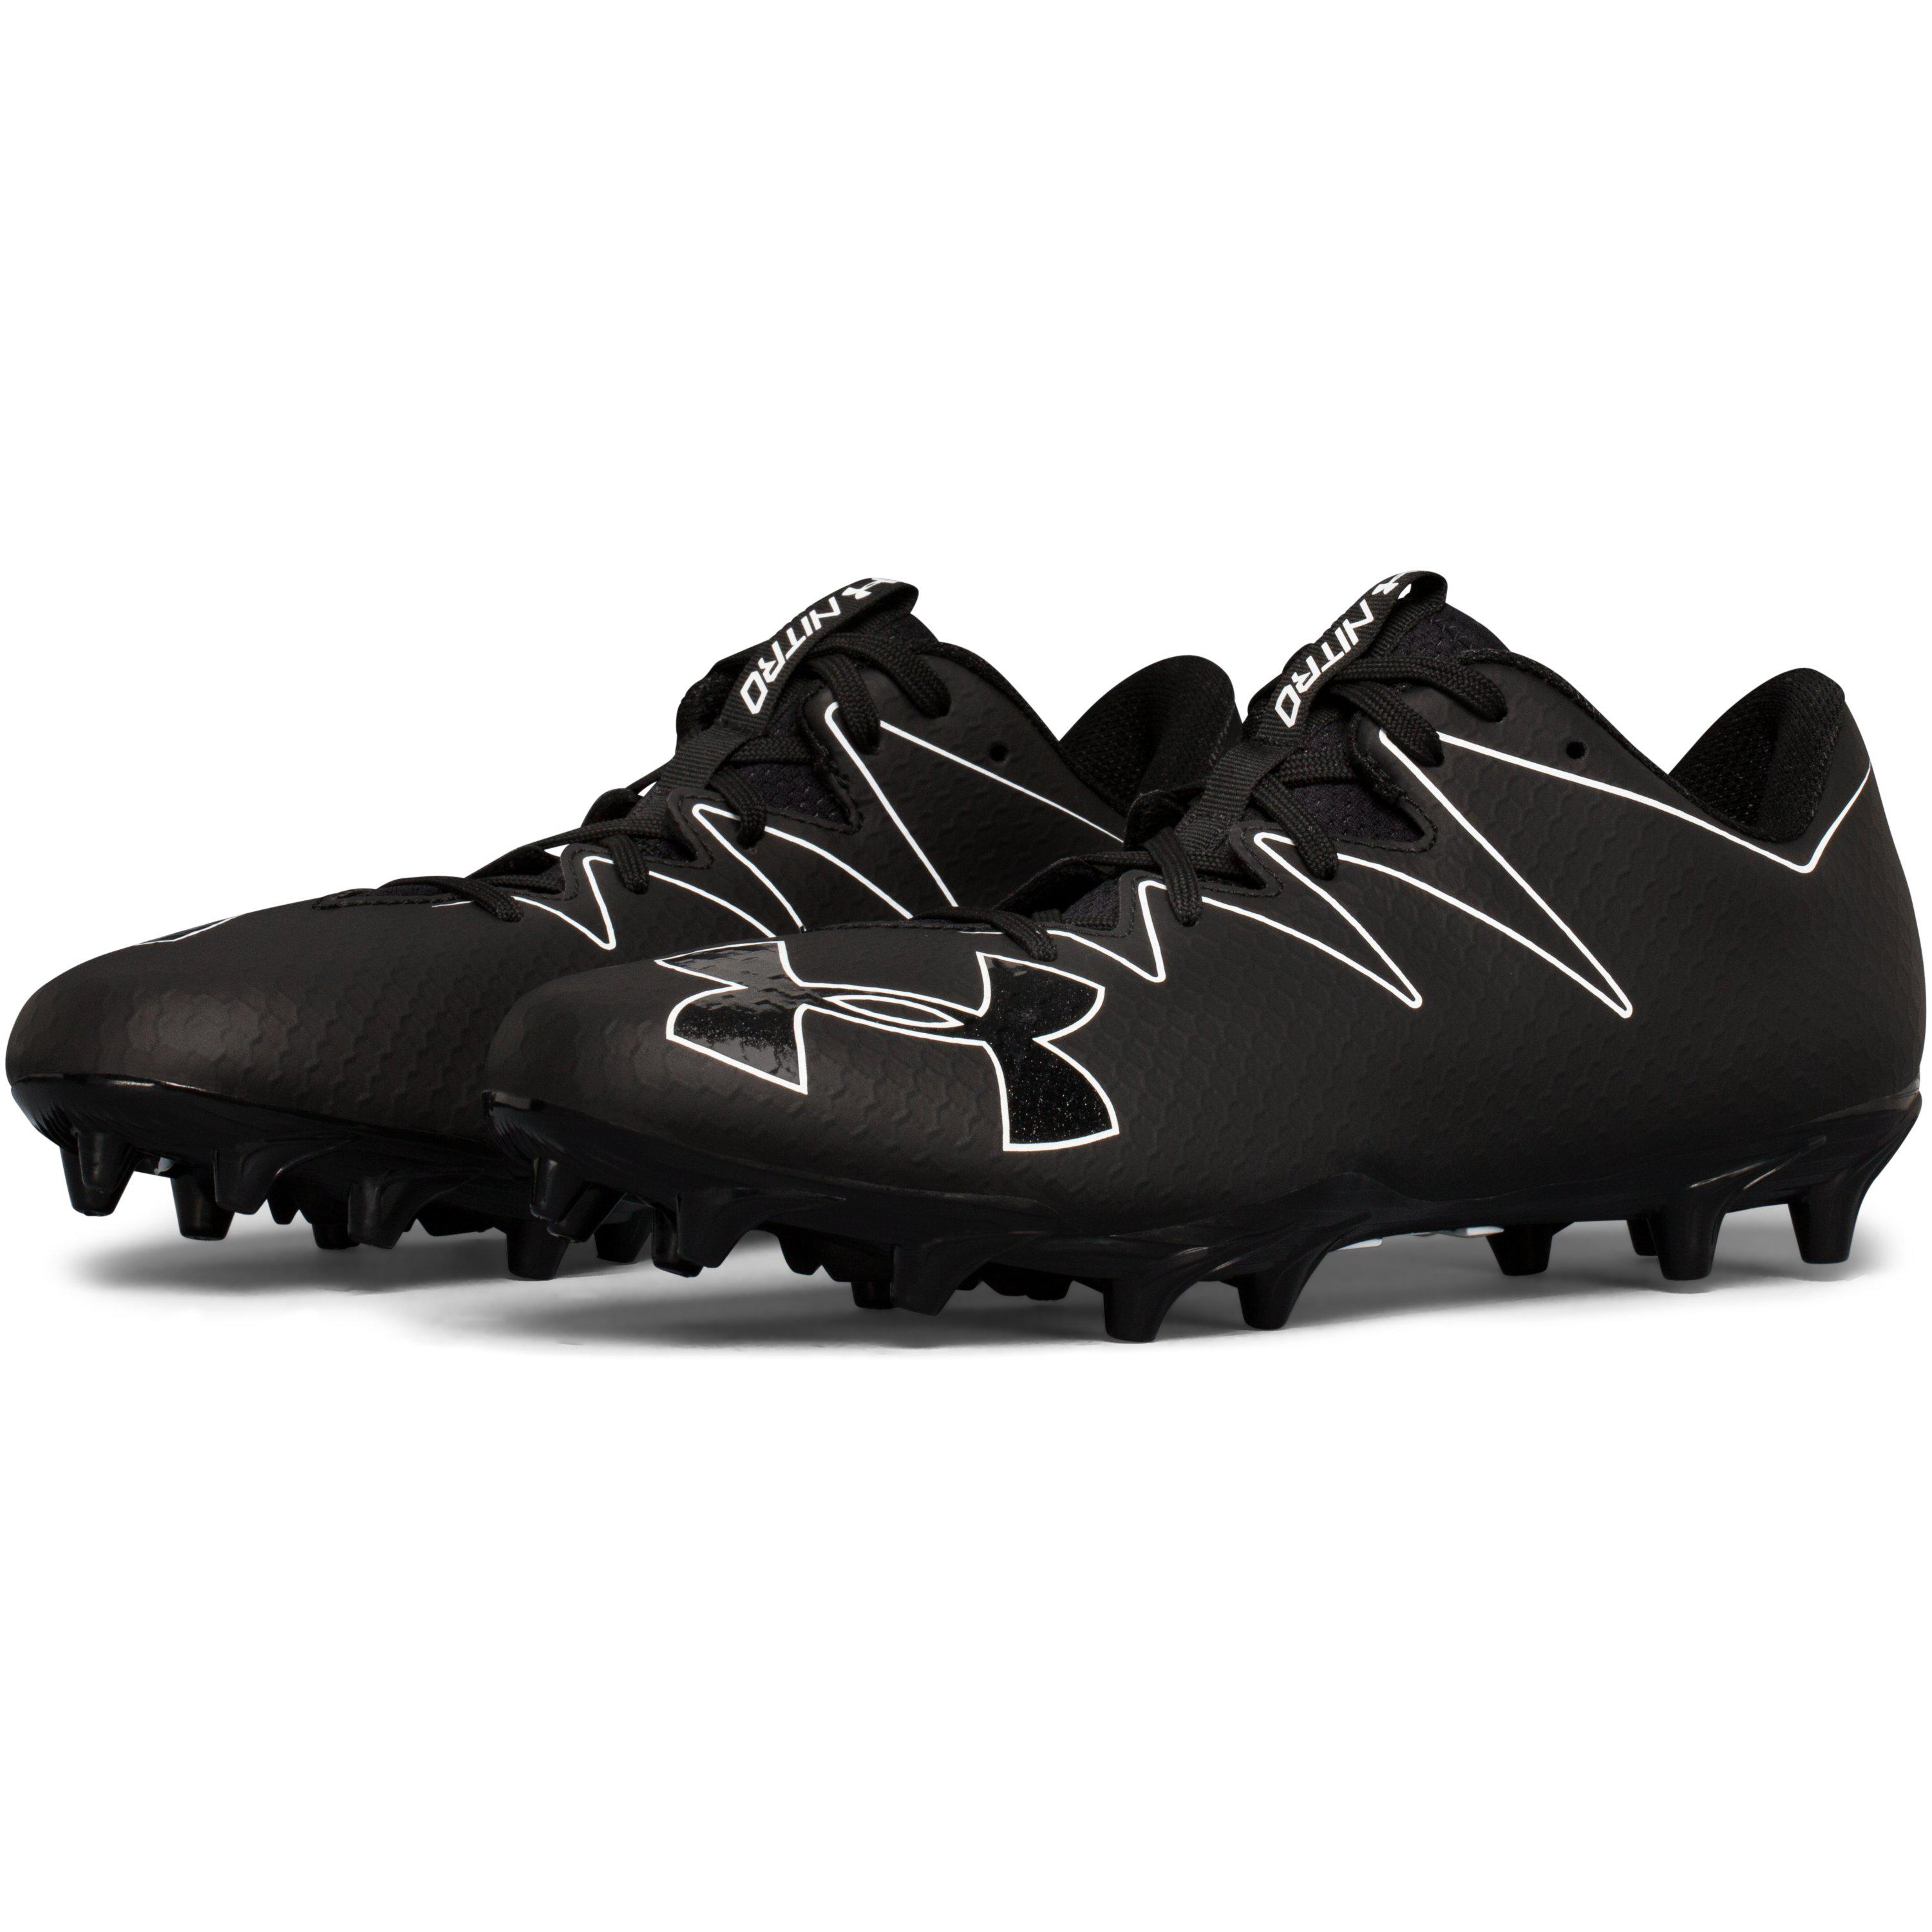 Under Armour Synthetic Men's Ua Nitro Low Mc Football Cleats in 